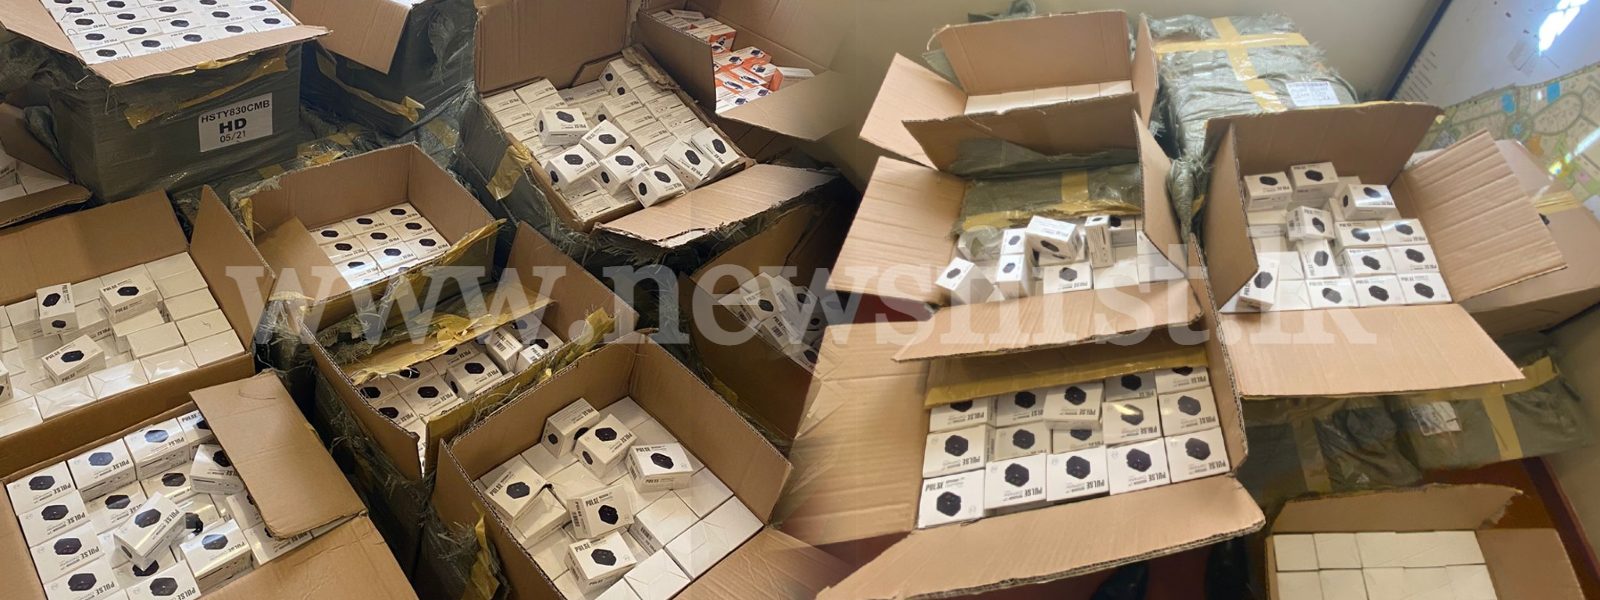 Customs seizes 4,200 oximeters imported without proper approvals